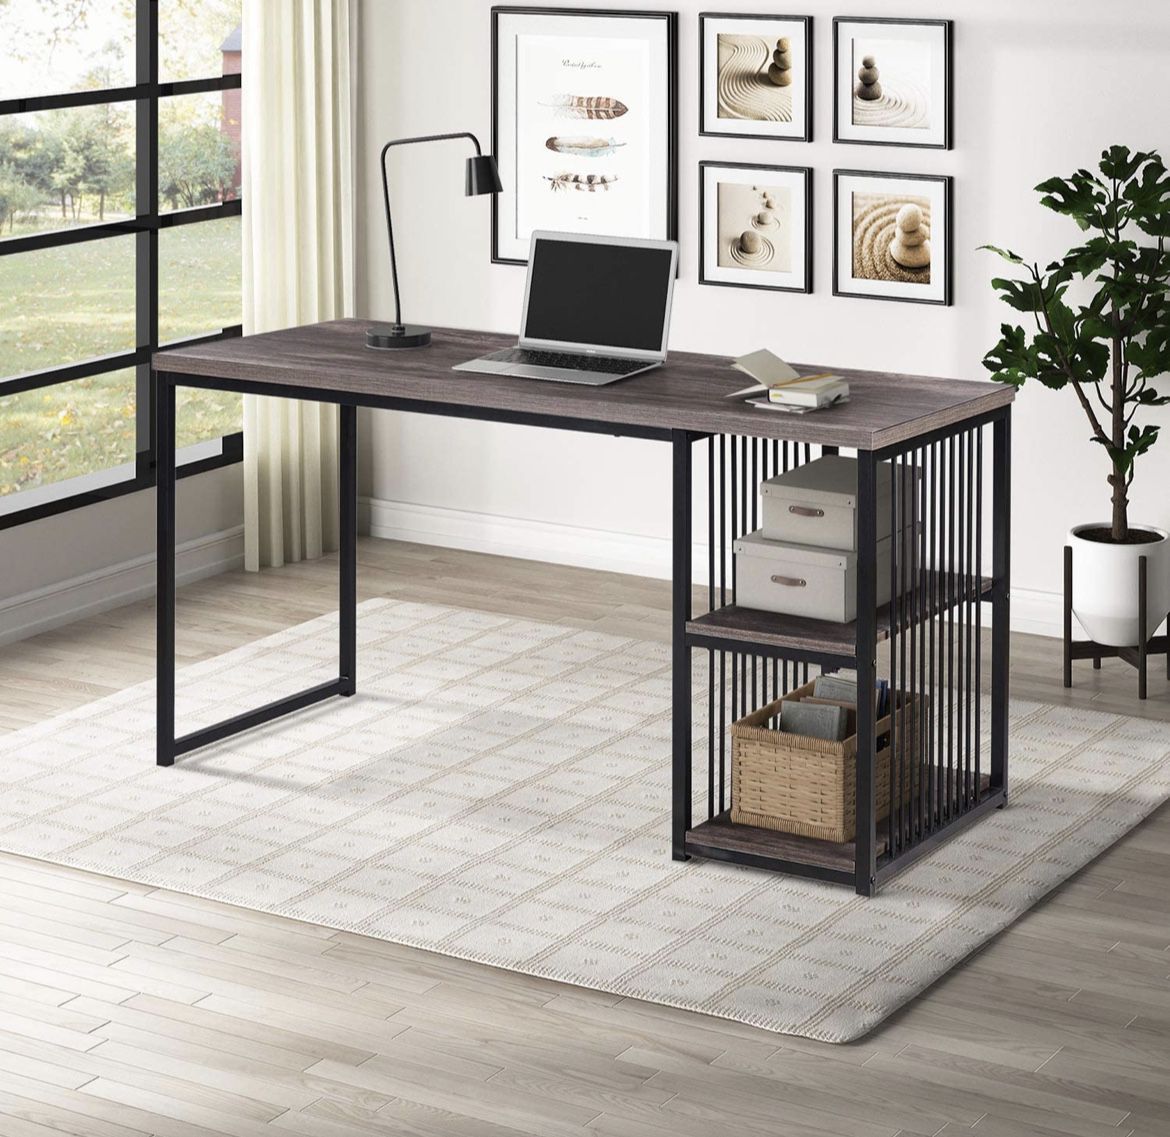 New Home Office Computer Desk, 55 Inch Writing Desk with 2 Storage Shelves on Left or Right, Stable